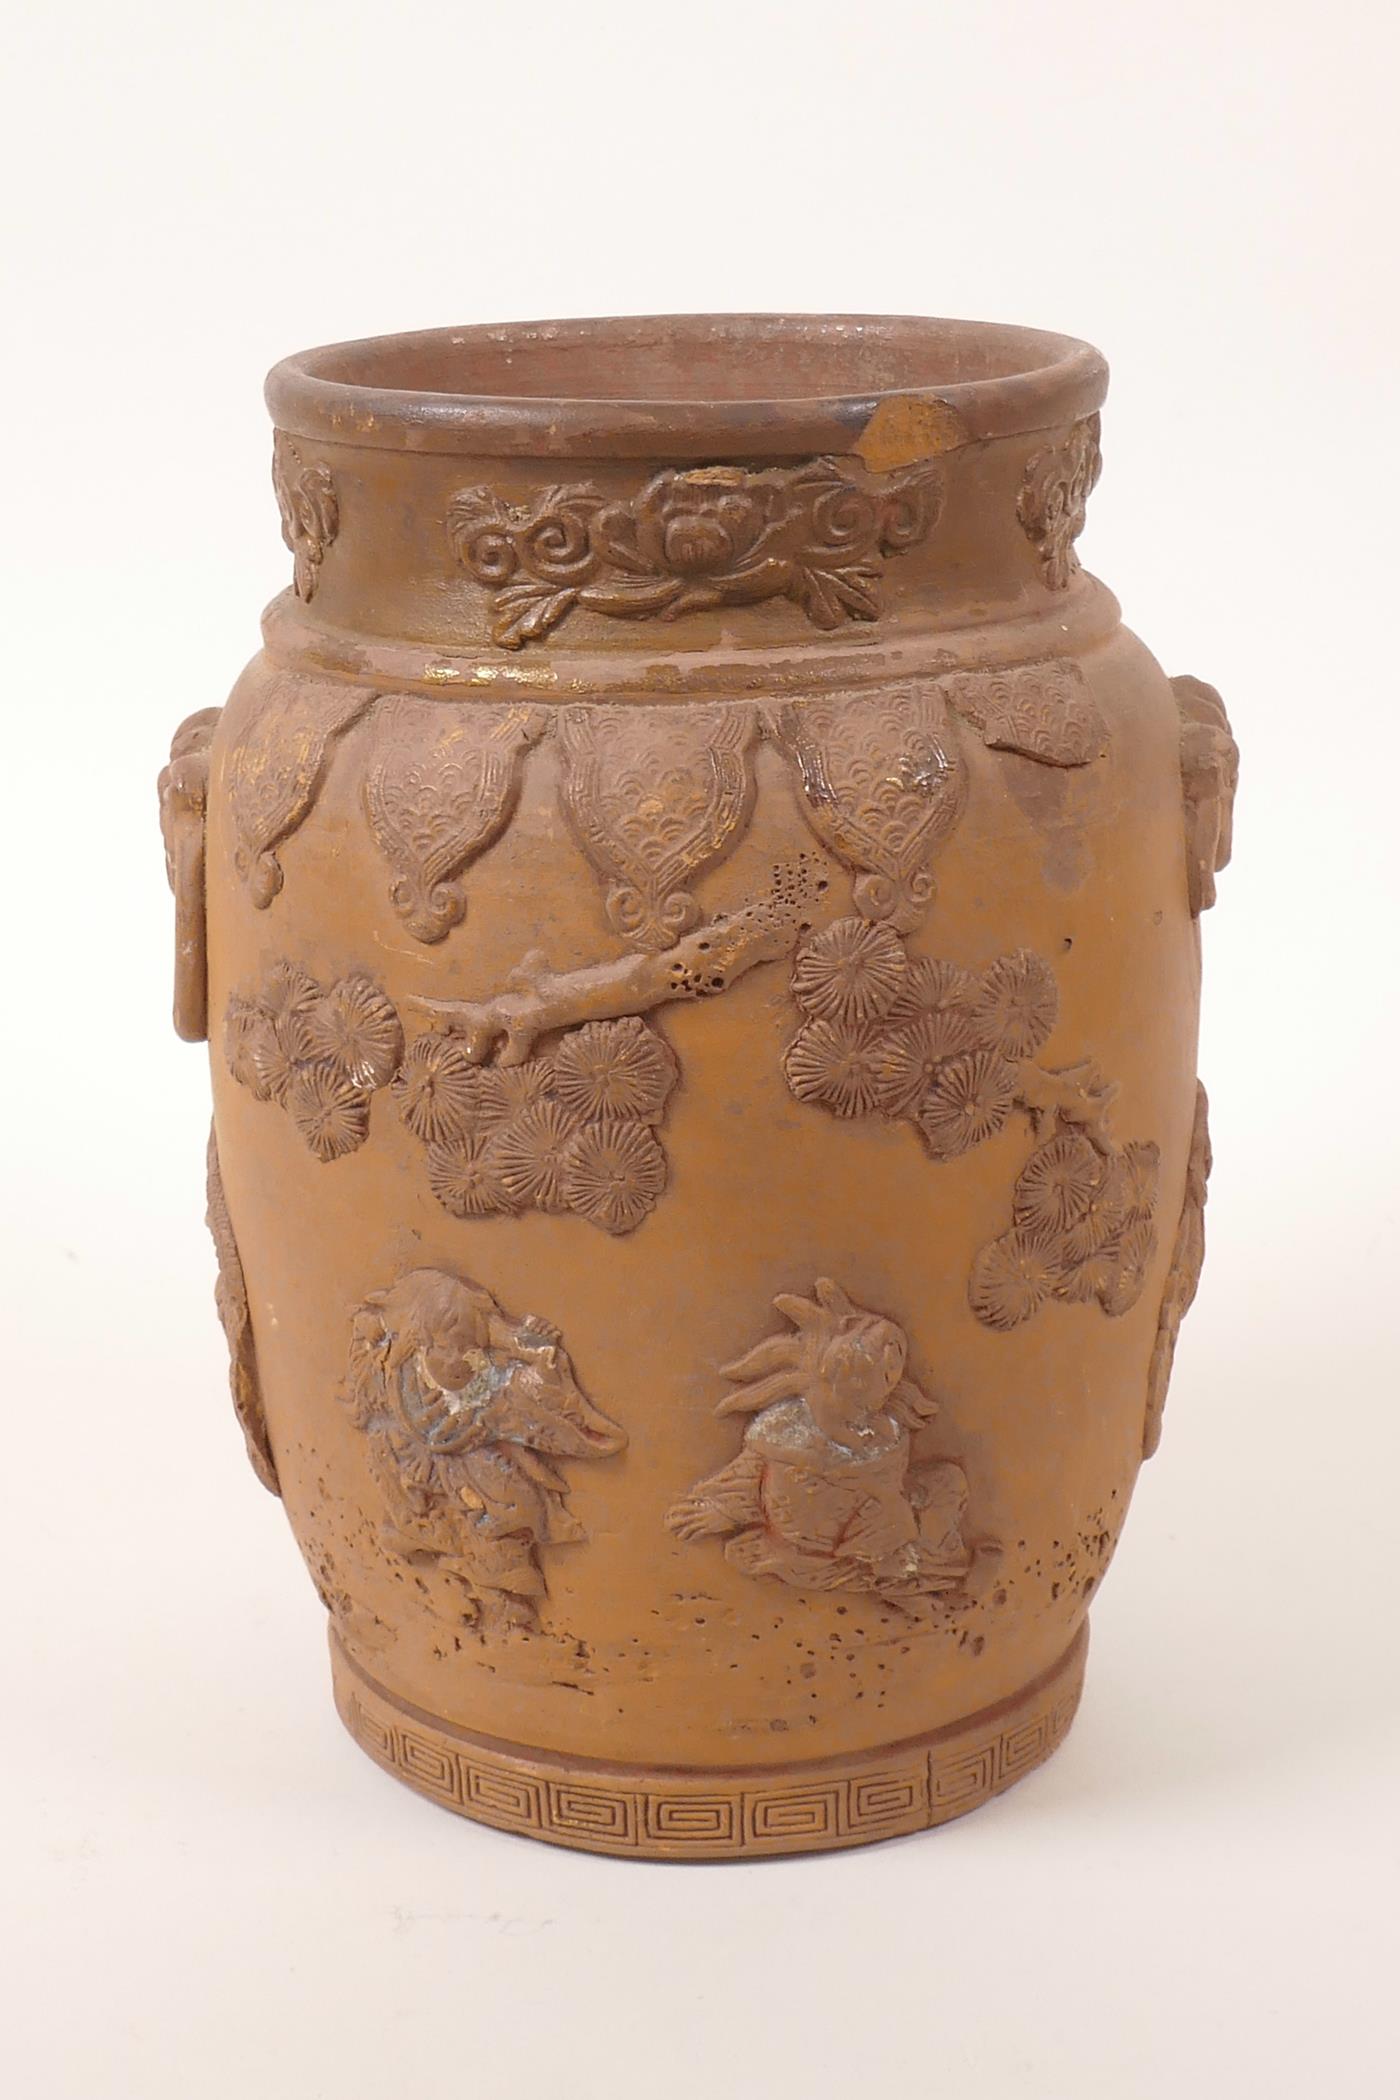 A Chinese earthenware jar with raised decoration of a figure and dragon, A/F losses and chips, 7"